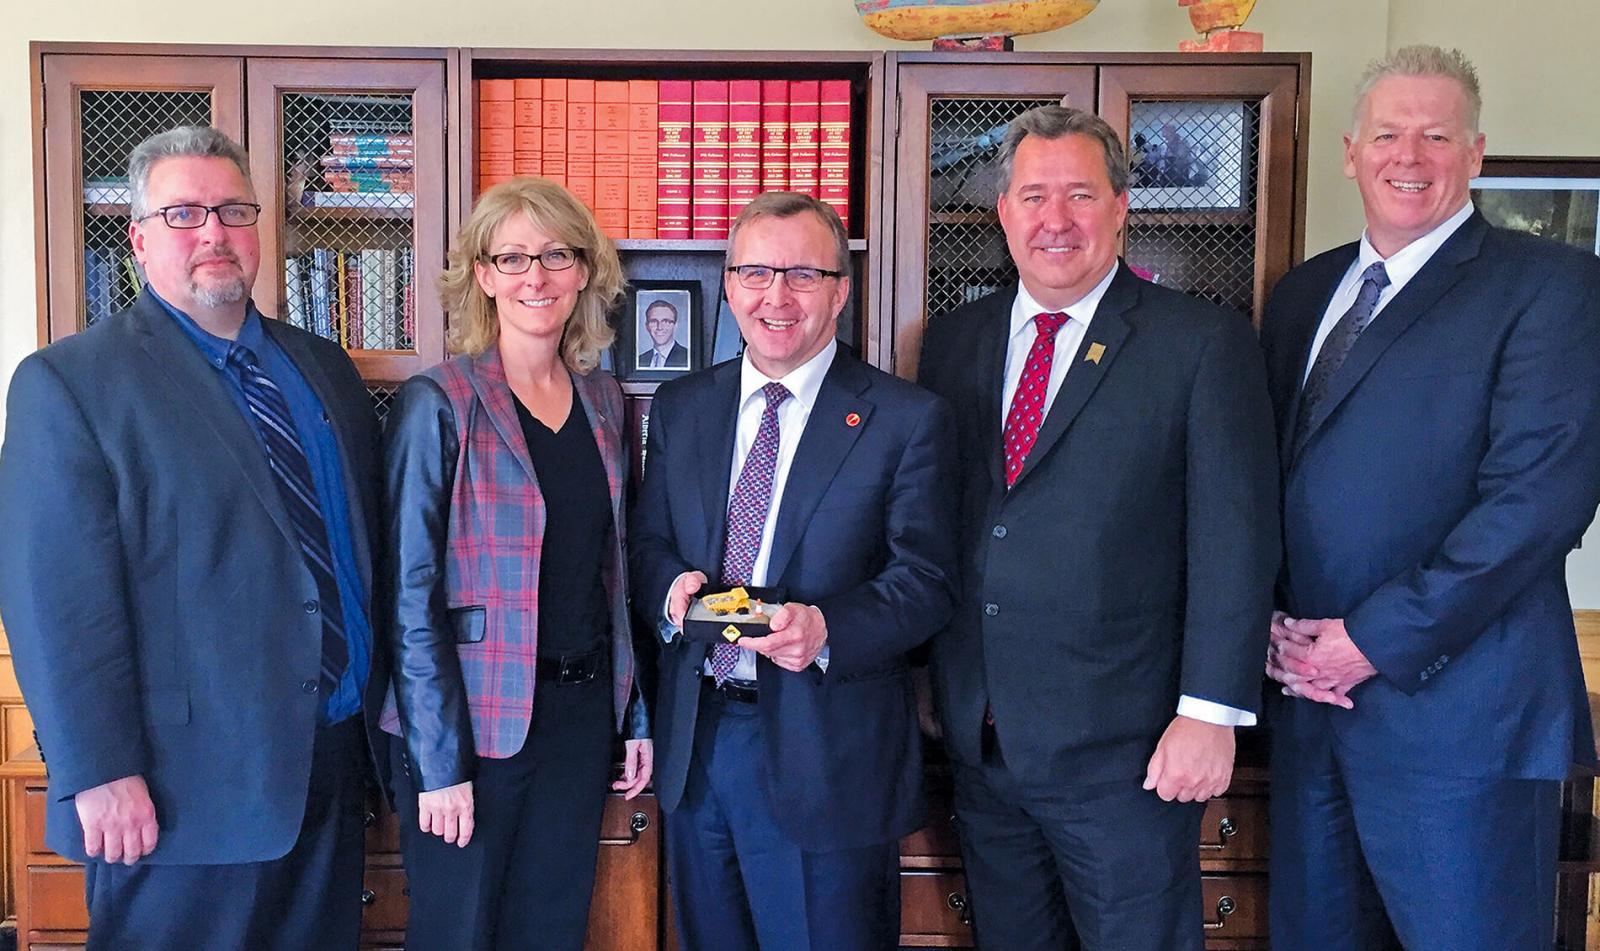 Senator Grant Mitchell (centre) accepting a DigSafe “MiniDig” after hosting the CCGA in the Senate during DigSafe month in April. (l-r) are Mike Sullivan, President, CCGA; Nathalie Moreau, Chair, Quebec CGA; Darwin Durnie (CPWA) and Ian Munro (ORCGA).